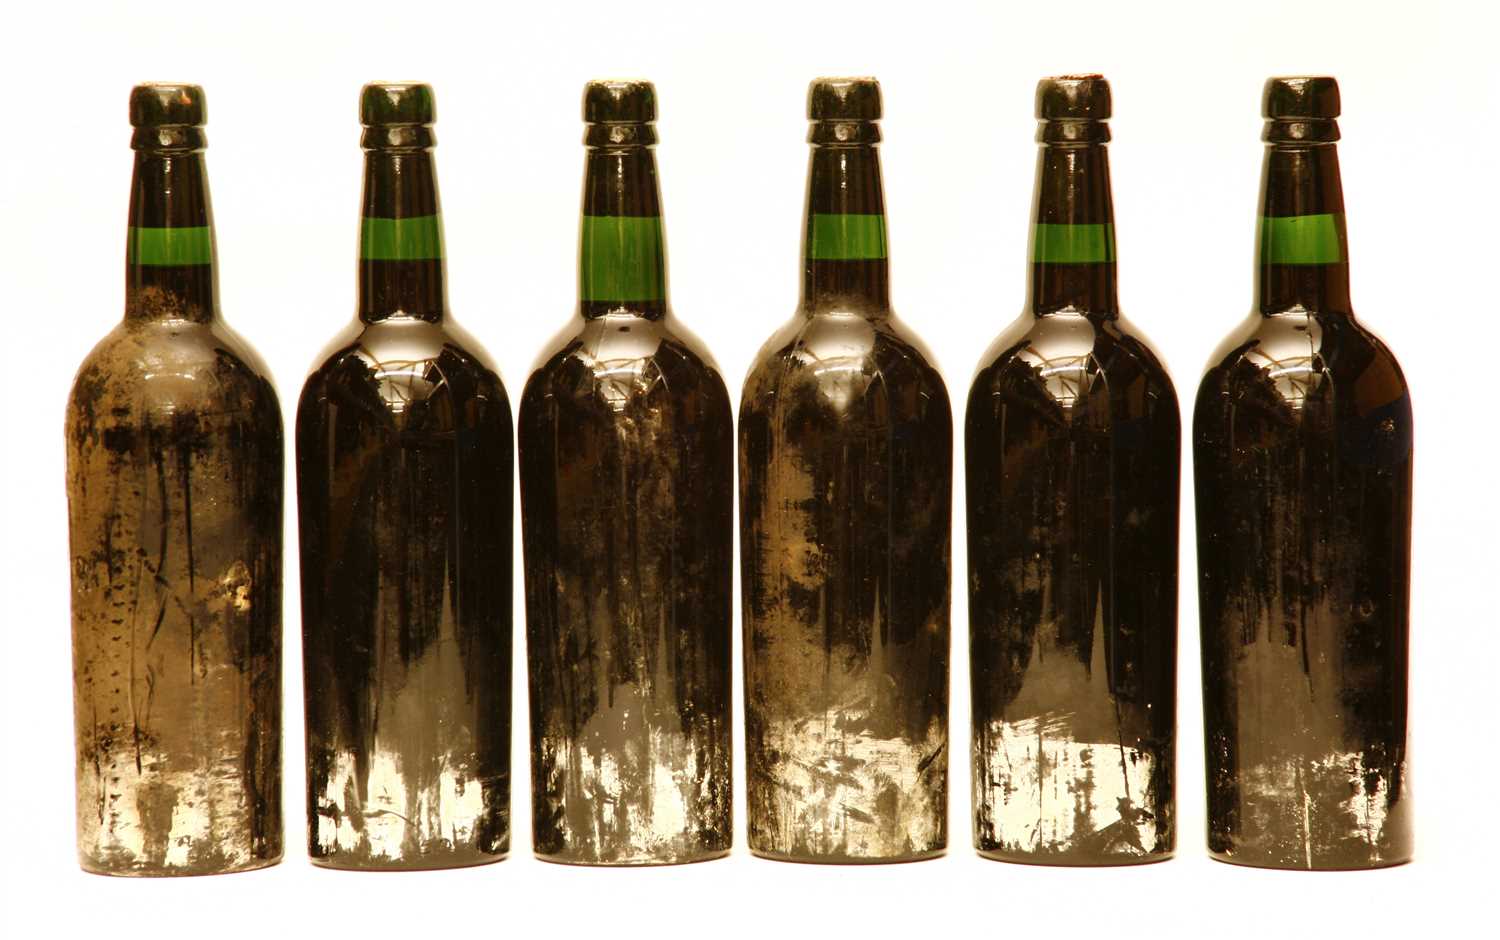 Lot 73 - Graham's, 1963, six bottles (date on corks, labels and capsules lacking)